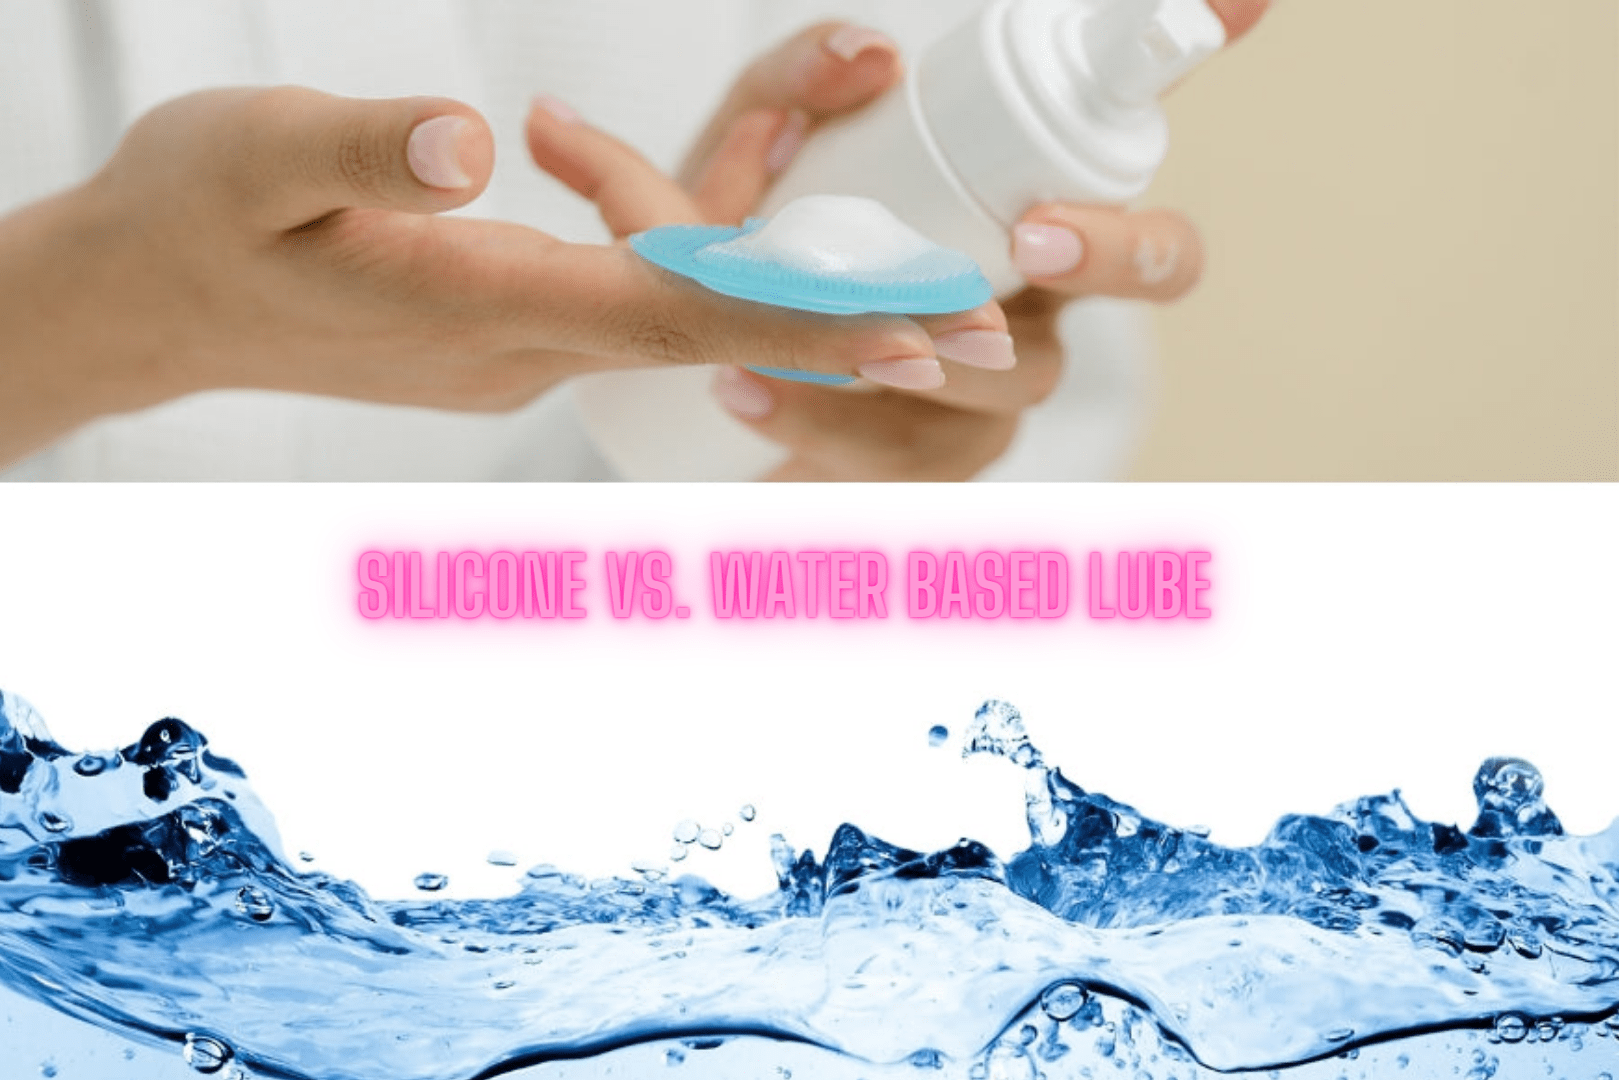 Silicone vs Water Based Lube Options for a Greater Experience